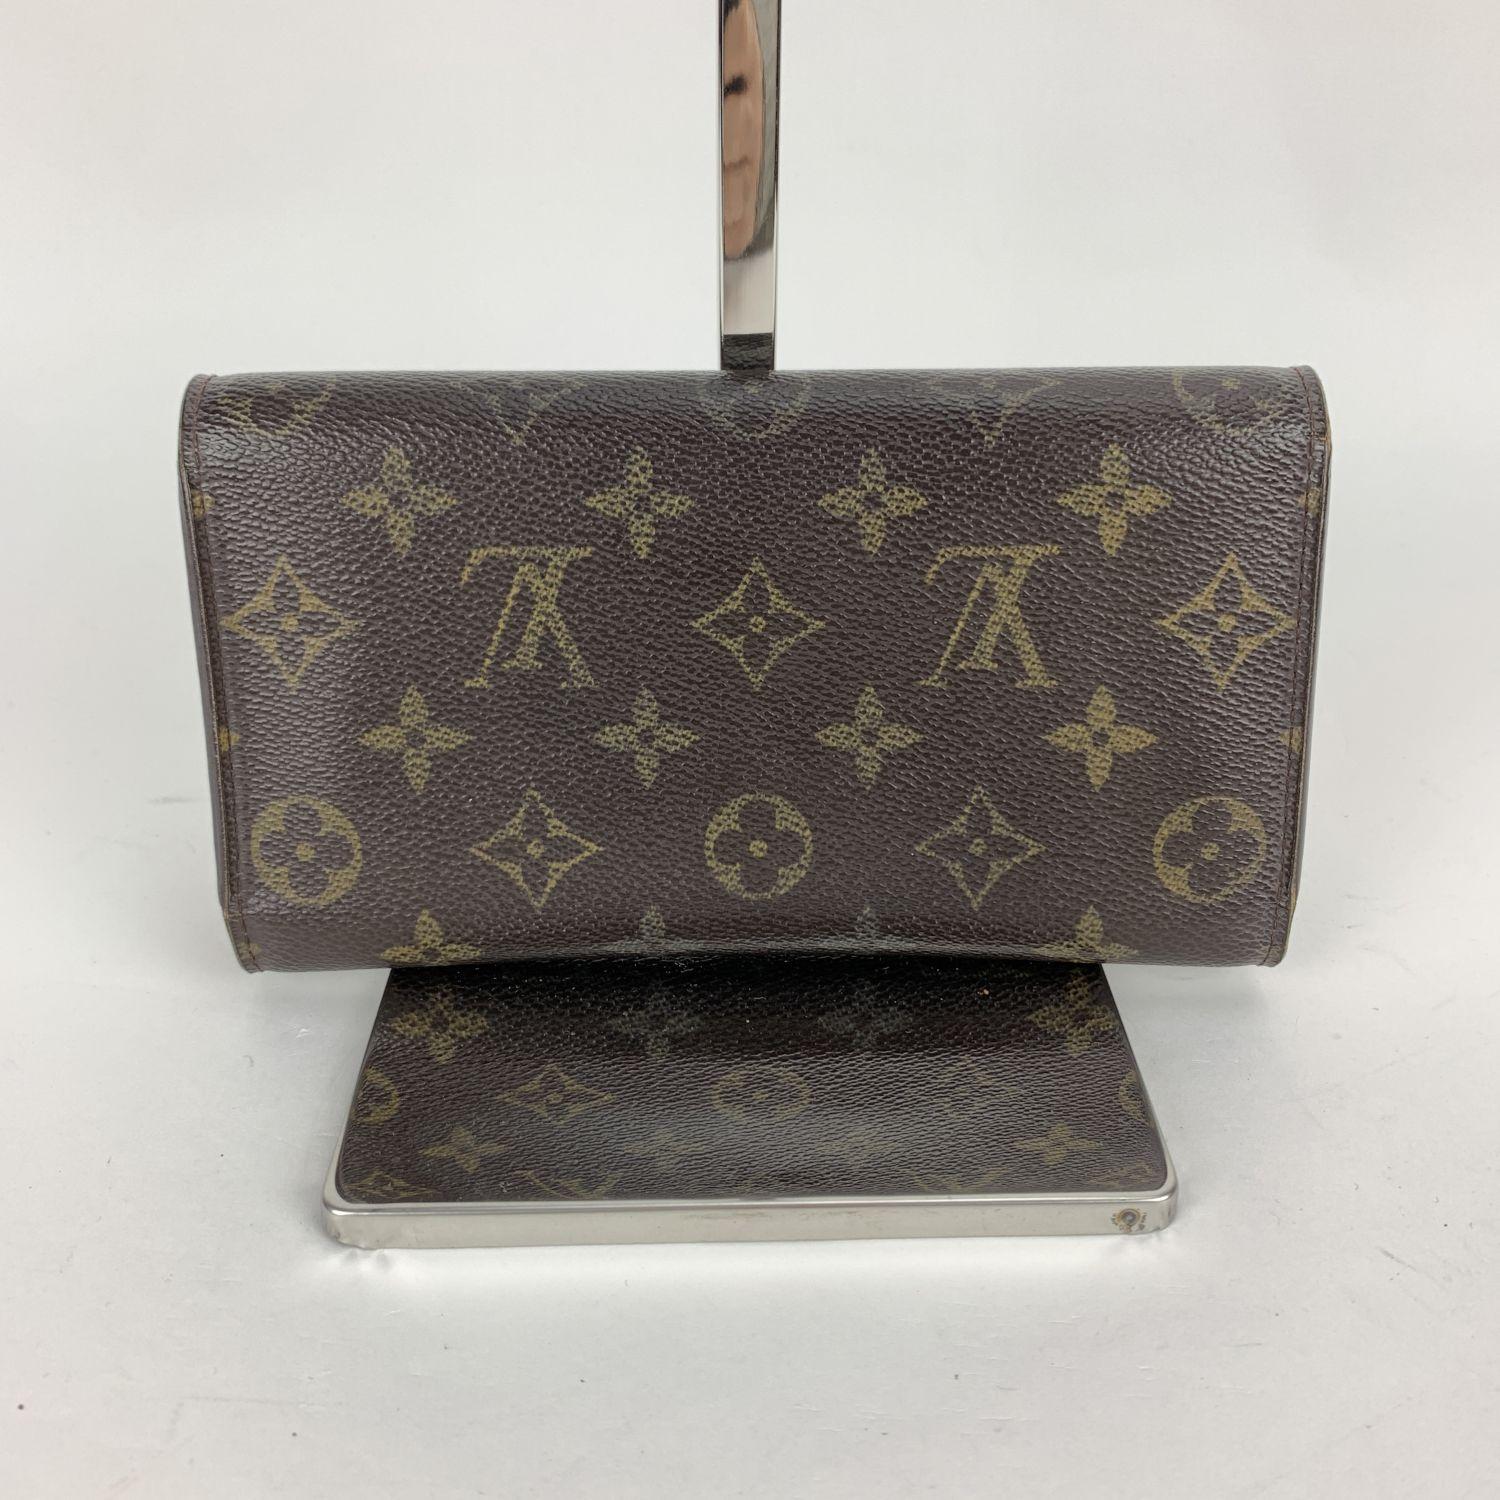 Louis Vuitton Monogram Canvas International Wallet. Monogram canvas exterior and genuine leather interior. 6 credit card slots. 2 long compartments for bills and papers. Snap closure. Pen holder. Interior coin pocket also with snap closure. Golden